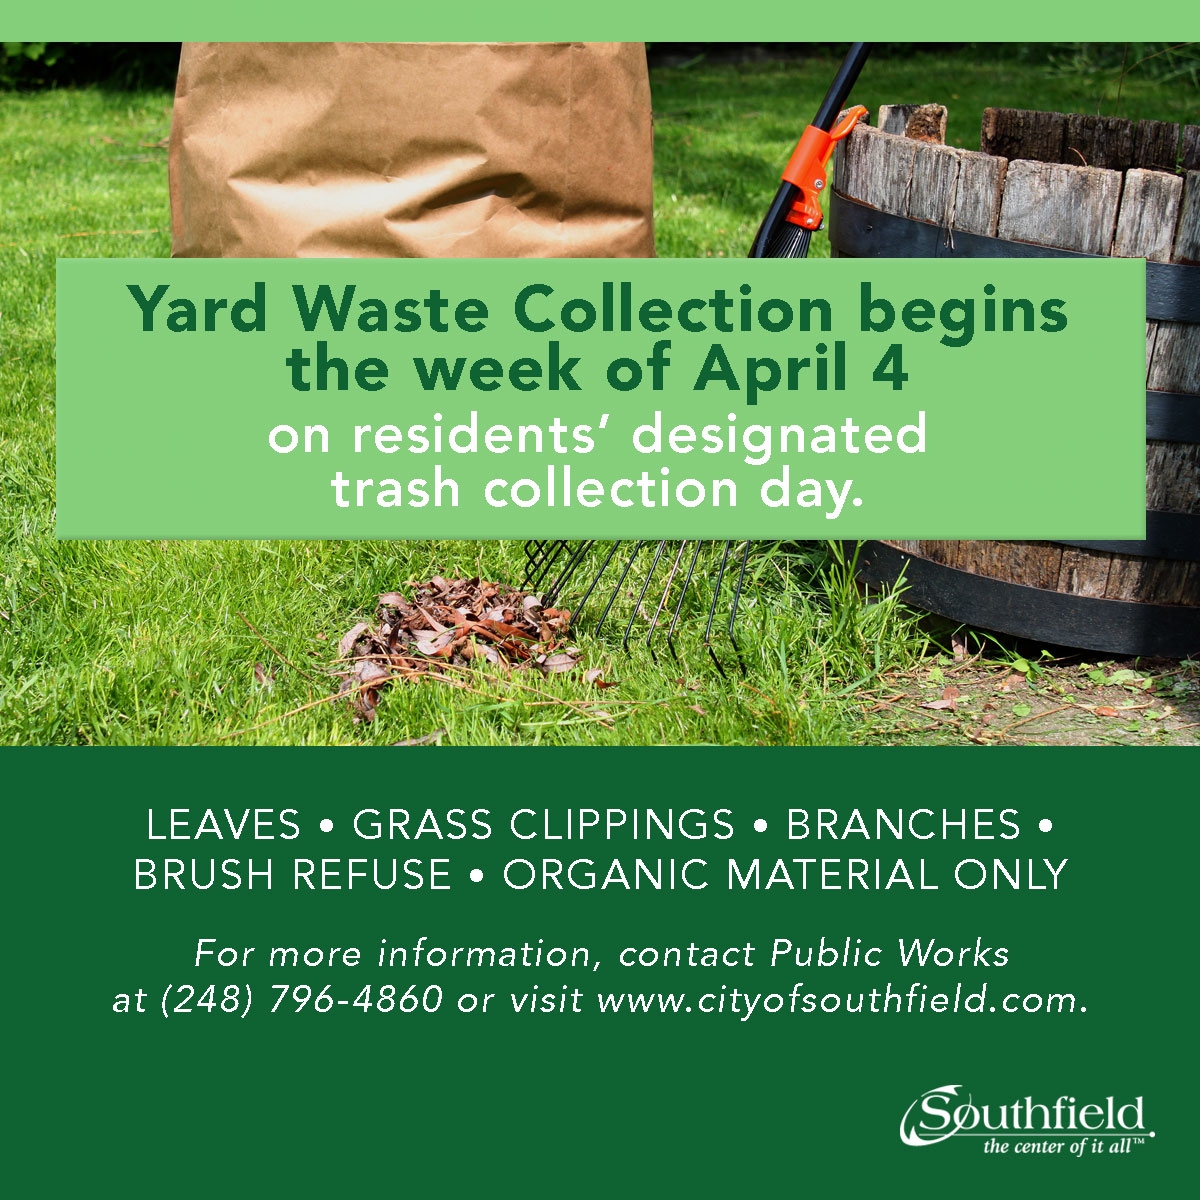 City of Southfield yard waste collection begins week of April 4 City